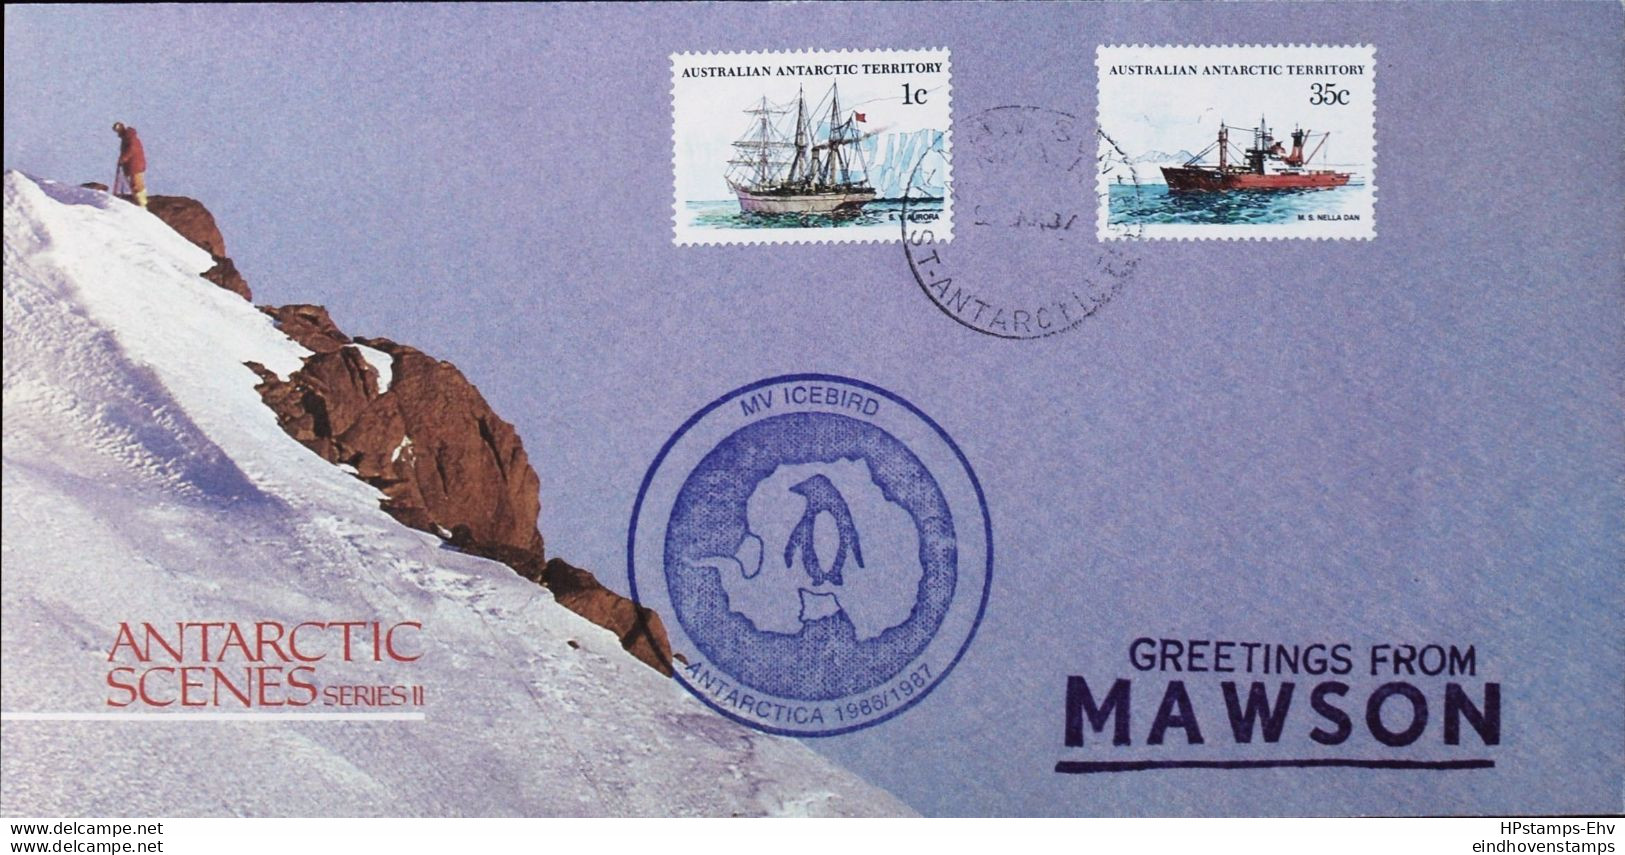 Antarctic Research - 1987 Australian Antarctic Mawson Letter Cancelled Dawson - Not Dispatched - 2111.01 MV Icebird Canc - Research Programs